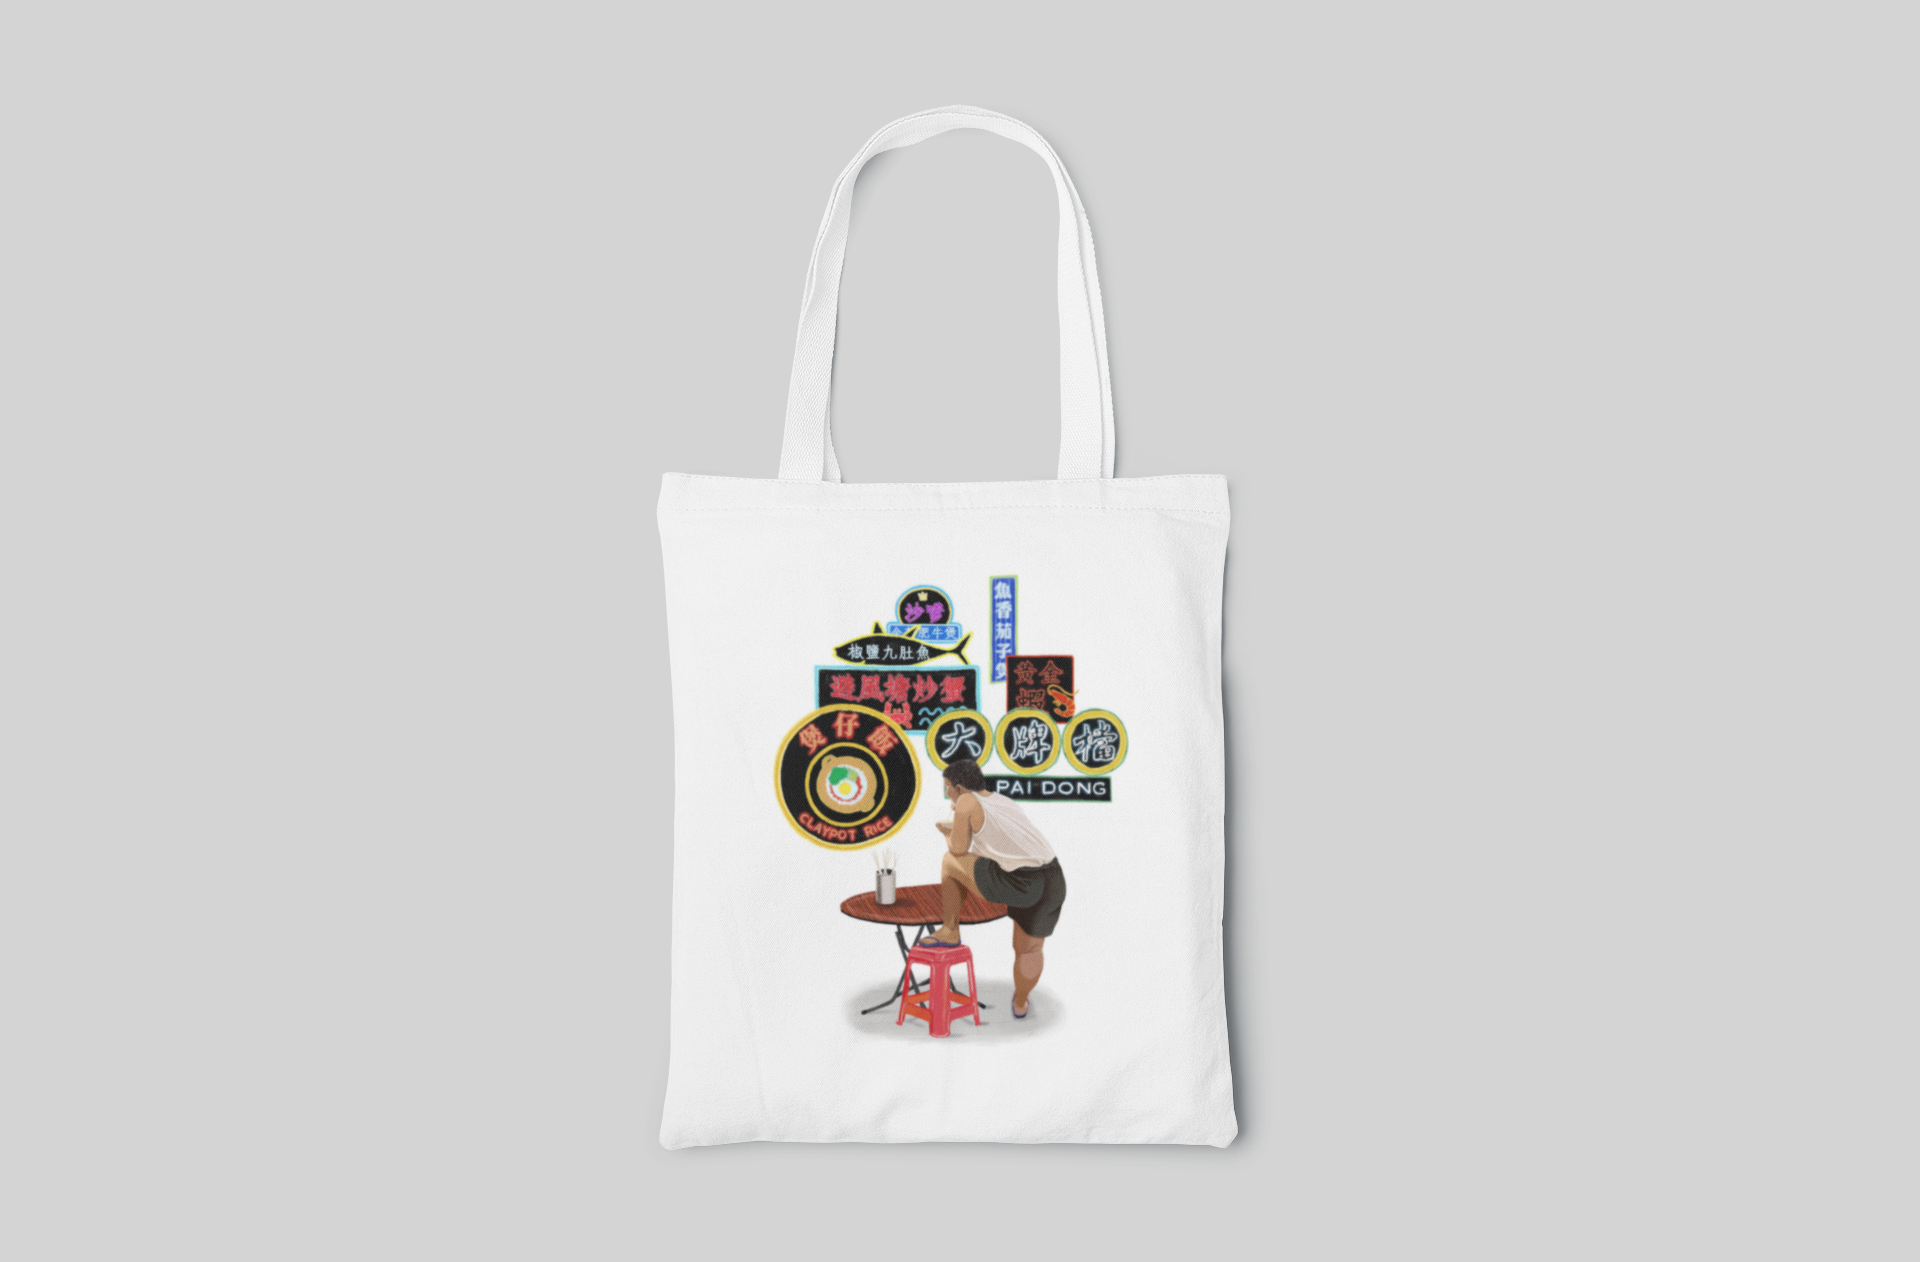 White urban designed tote bag with illustration of a guy sitting at red chair next to the table and many HK neon lights in the background, front side